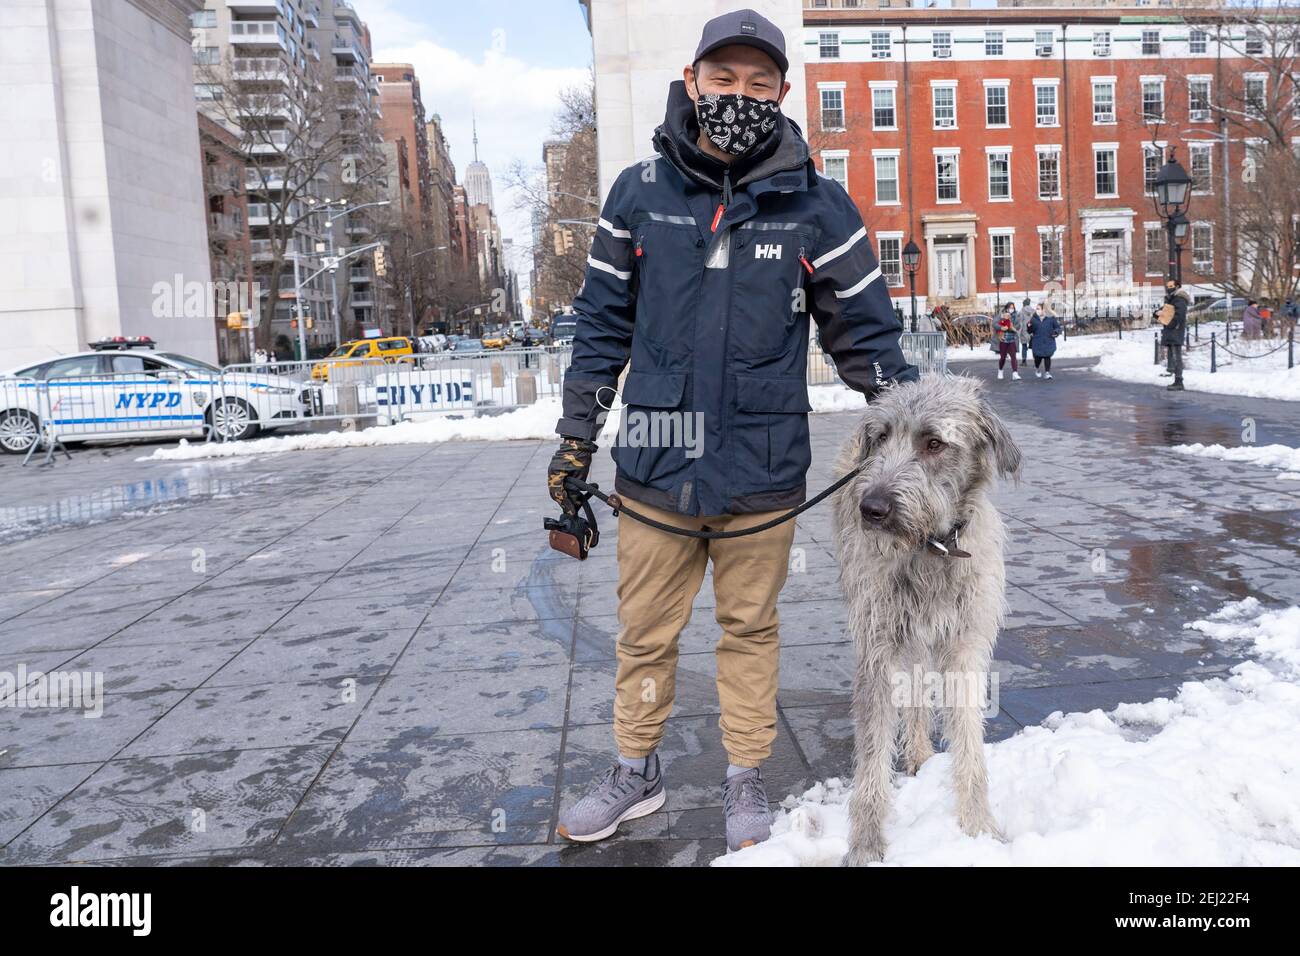 New York, United States. 20th Feb, 2021. NEW YORK, NY - FEBRUARY 20: Protestor with an Irish Wolfhound seen at the End The Violence Towards Asians rally in Washington Square Park on February 20, 2021 in New York City. Since the start of the coronavirus pandemic, violence towards Asian Americans has increased at a much higher rate than previous years. The New York City Police Department (NYPD) reported a 1,900% increase in anti-Asian hate crimes in 2020. Credit: Ron Adar/Alamy Live News Stock Photo